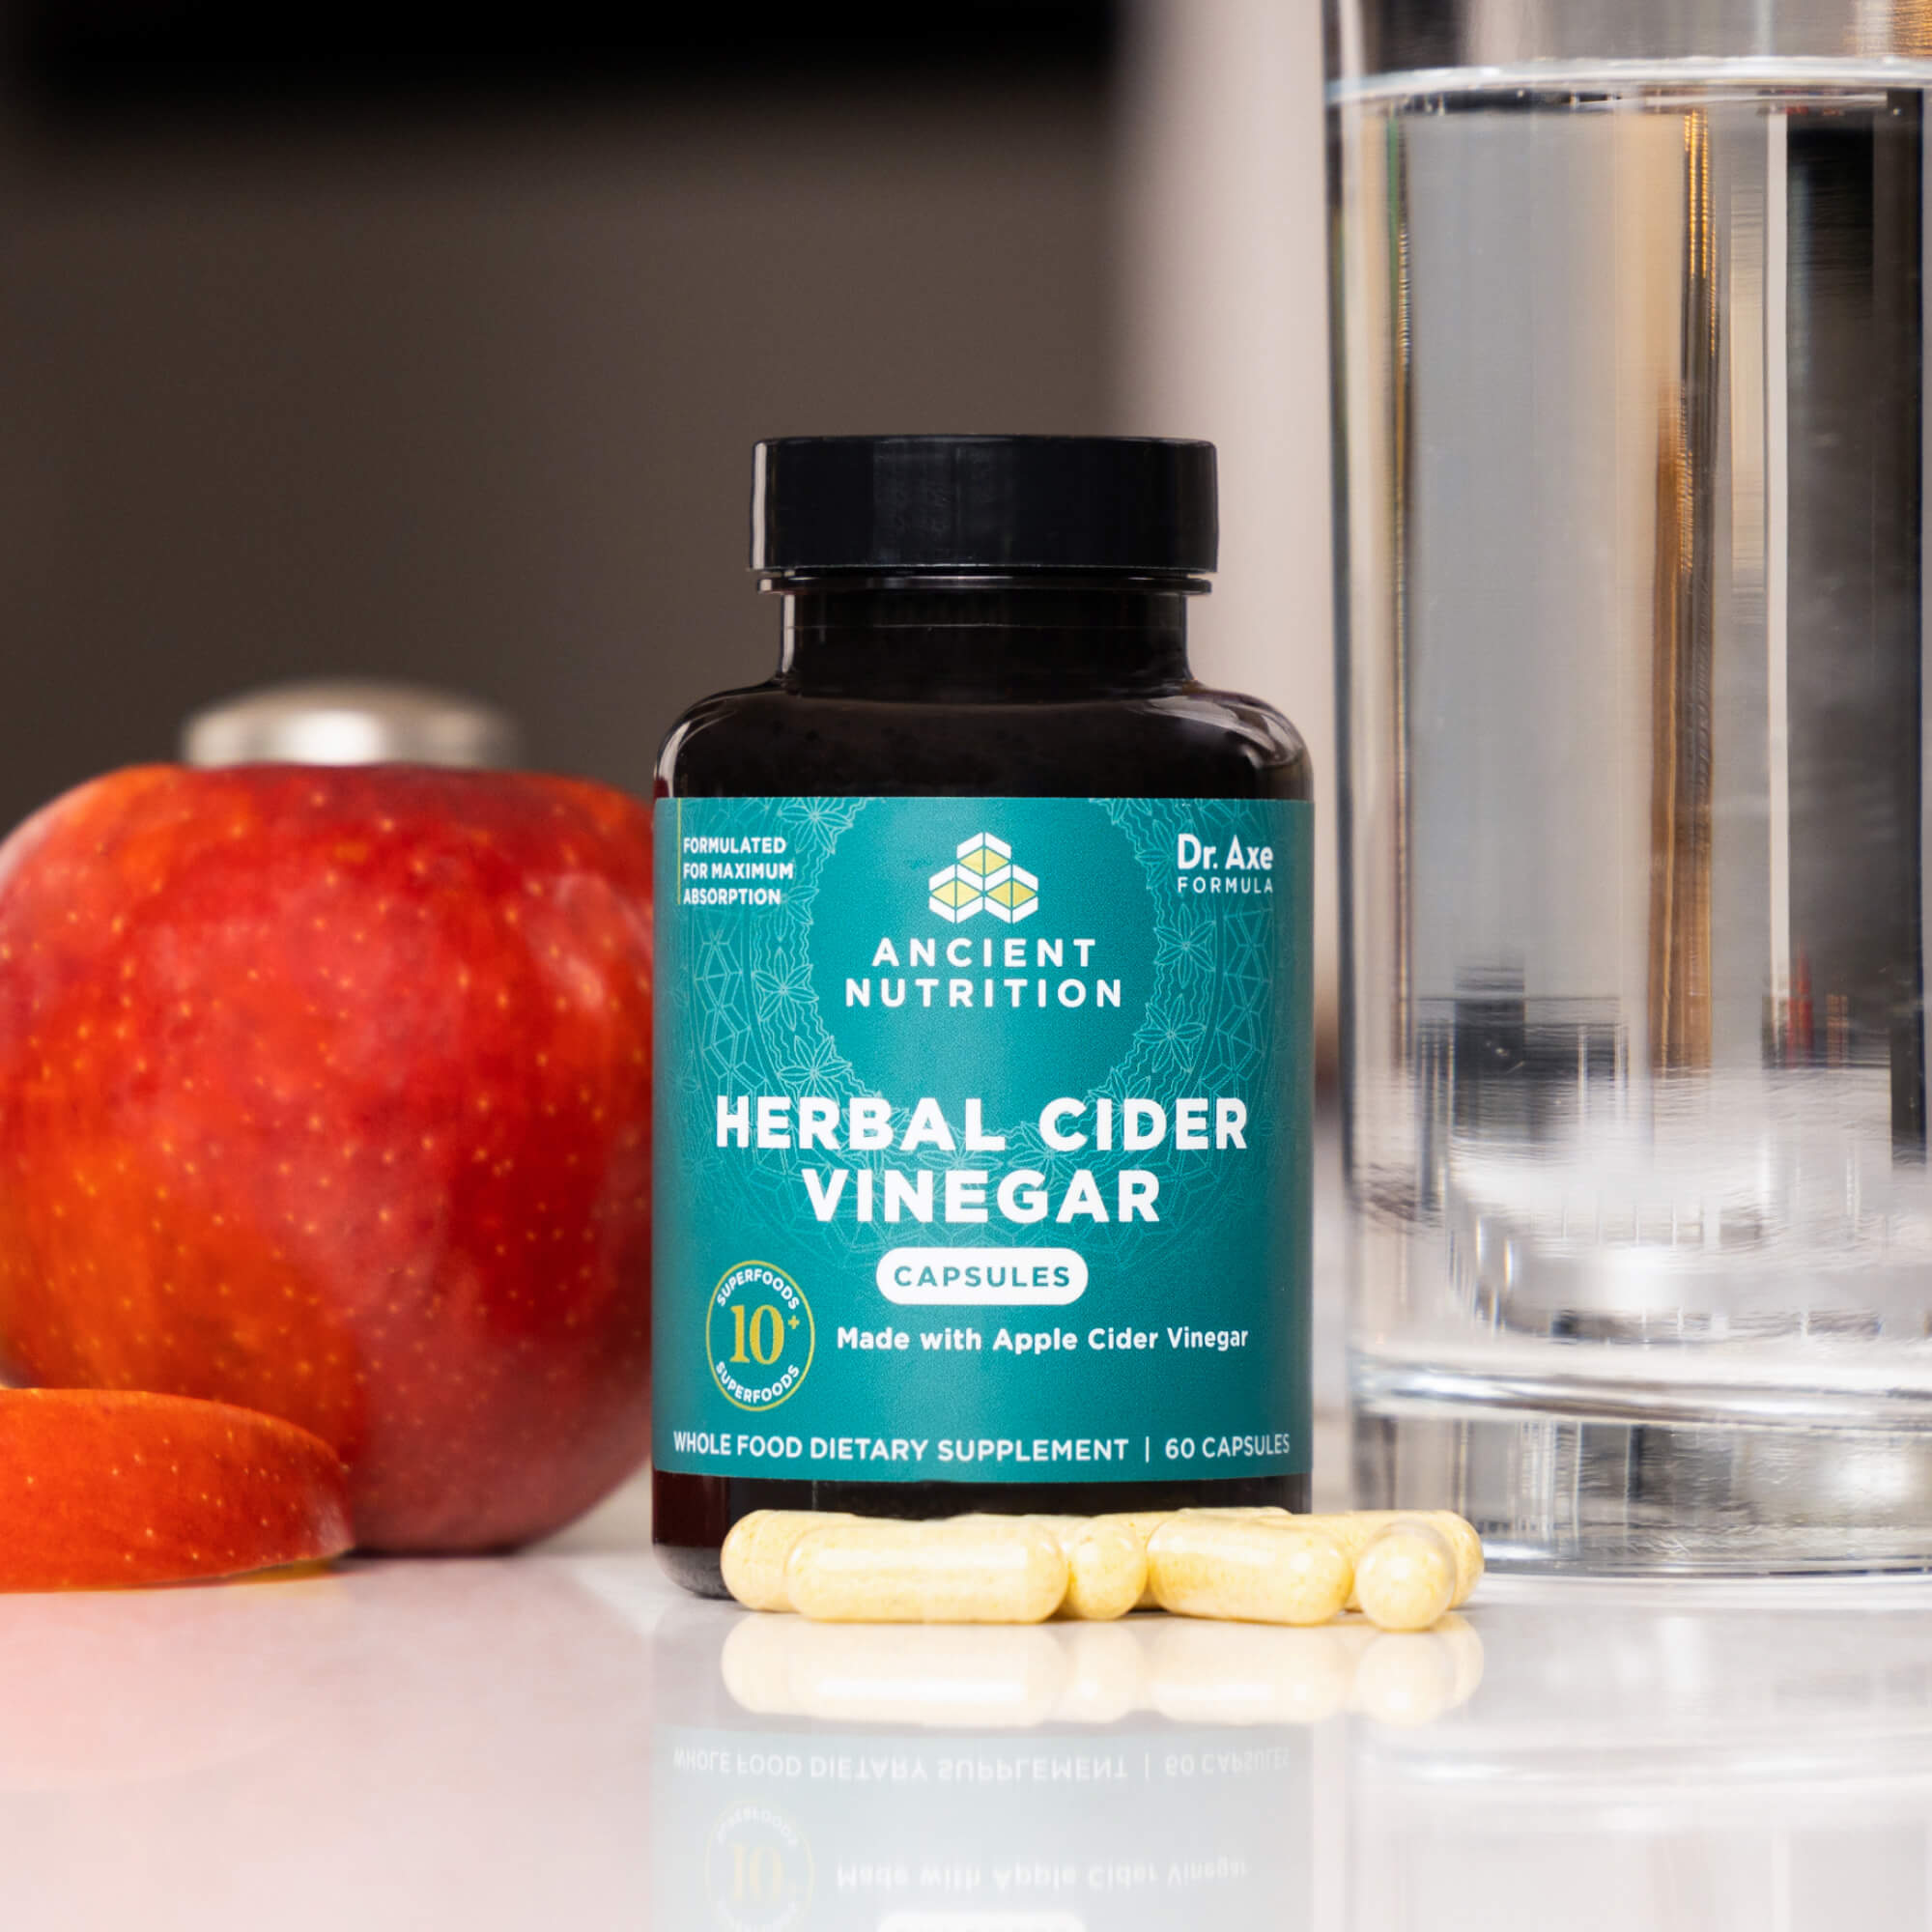 herbal cider vinegar capsules on a counter next to an apple